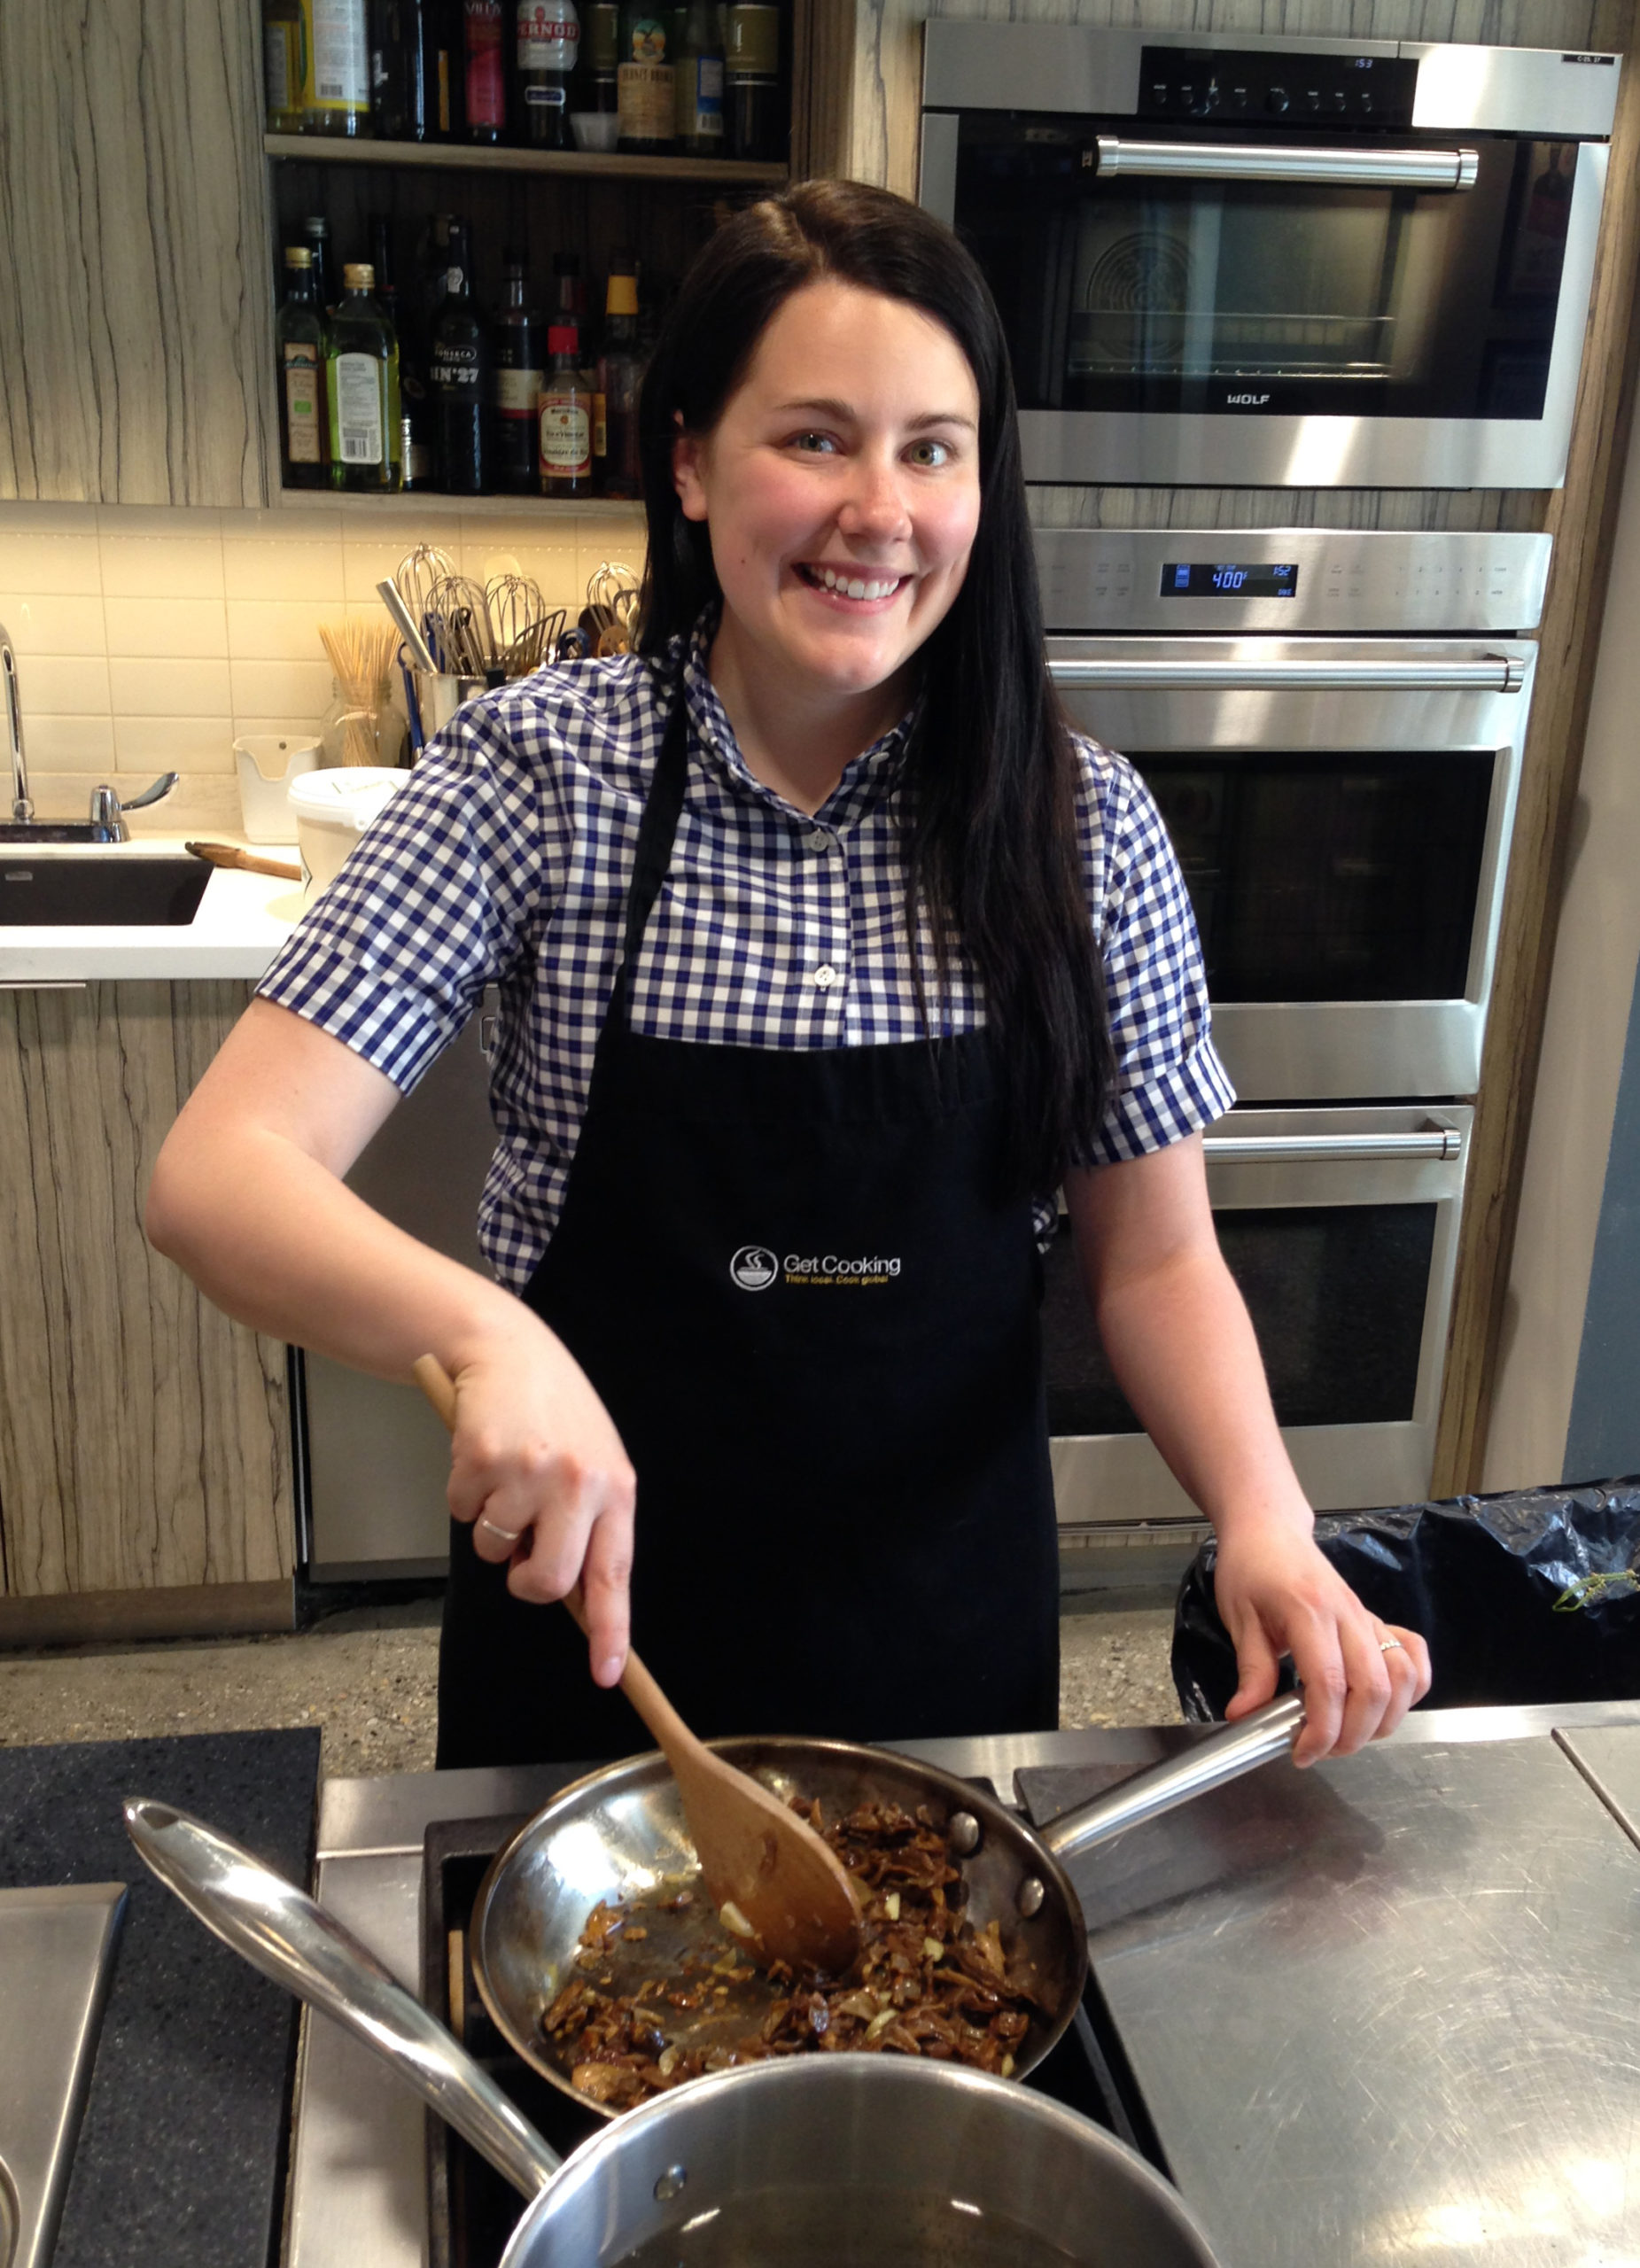 Jen stirs mushrooms in a pan, smiling in a black apron and black and white plaid shirt